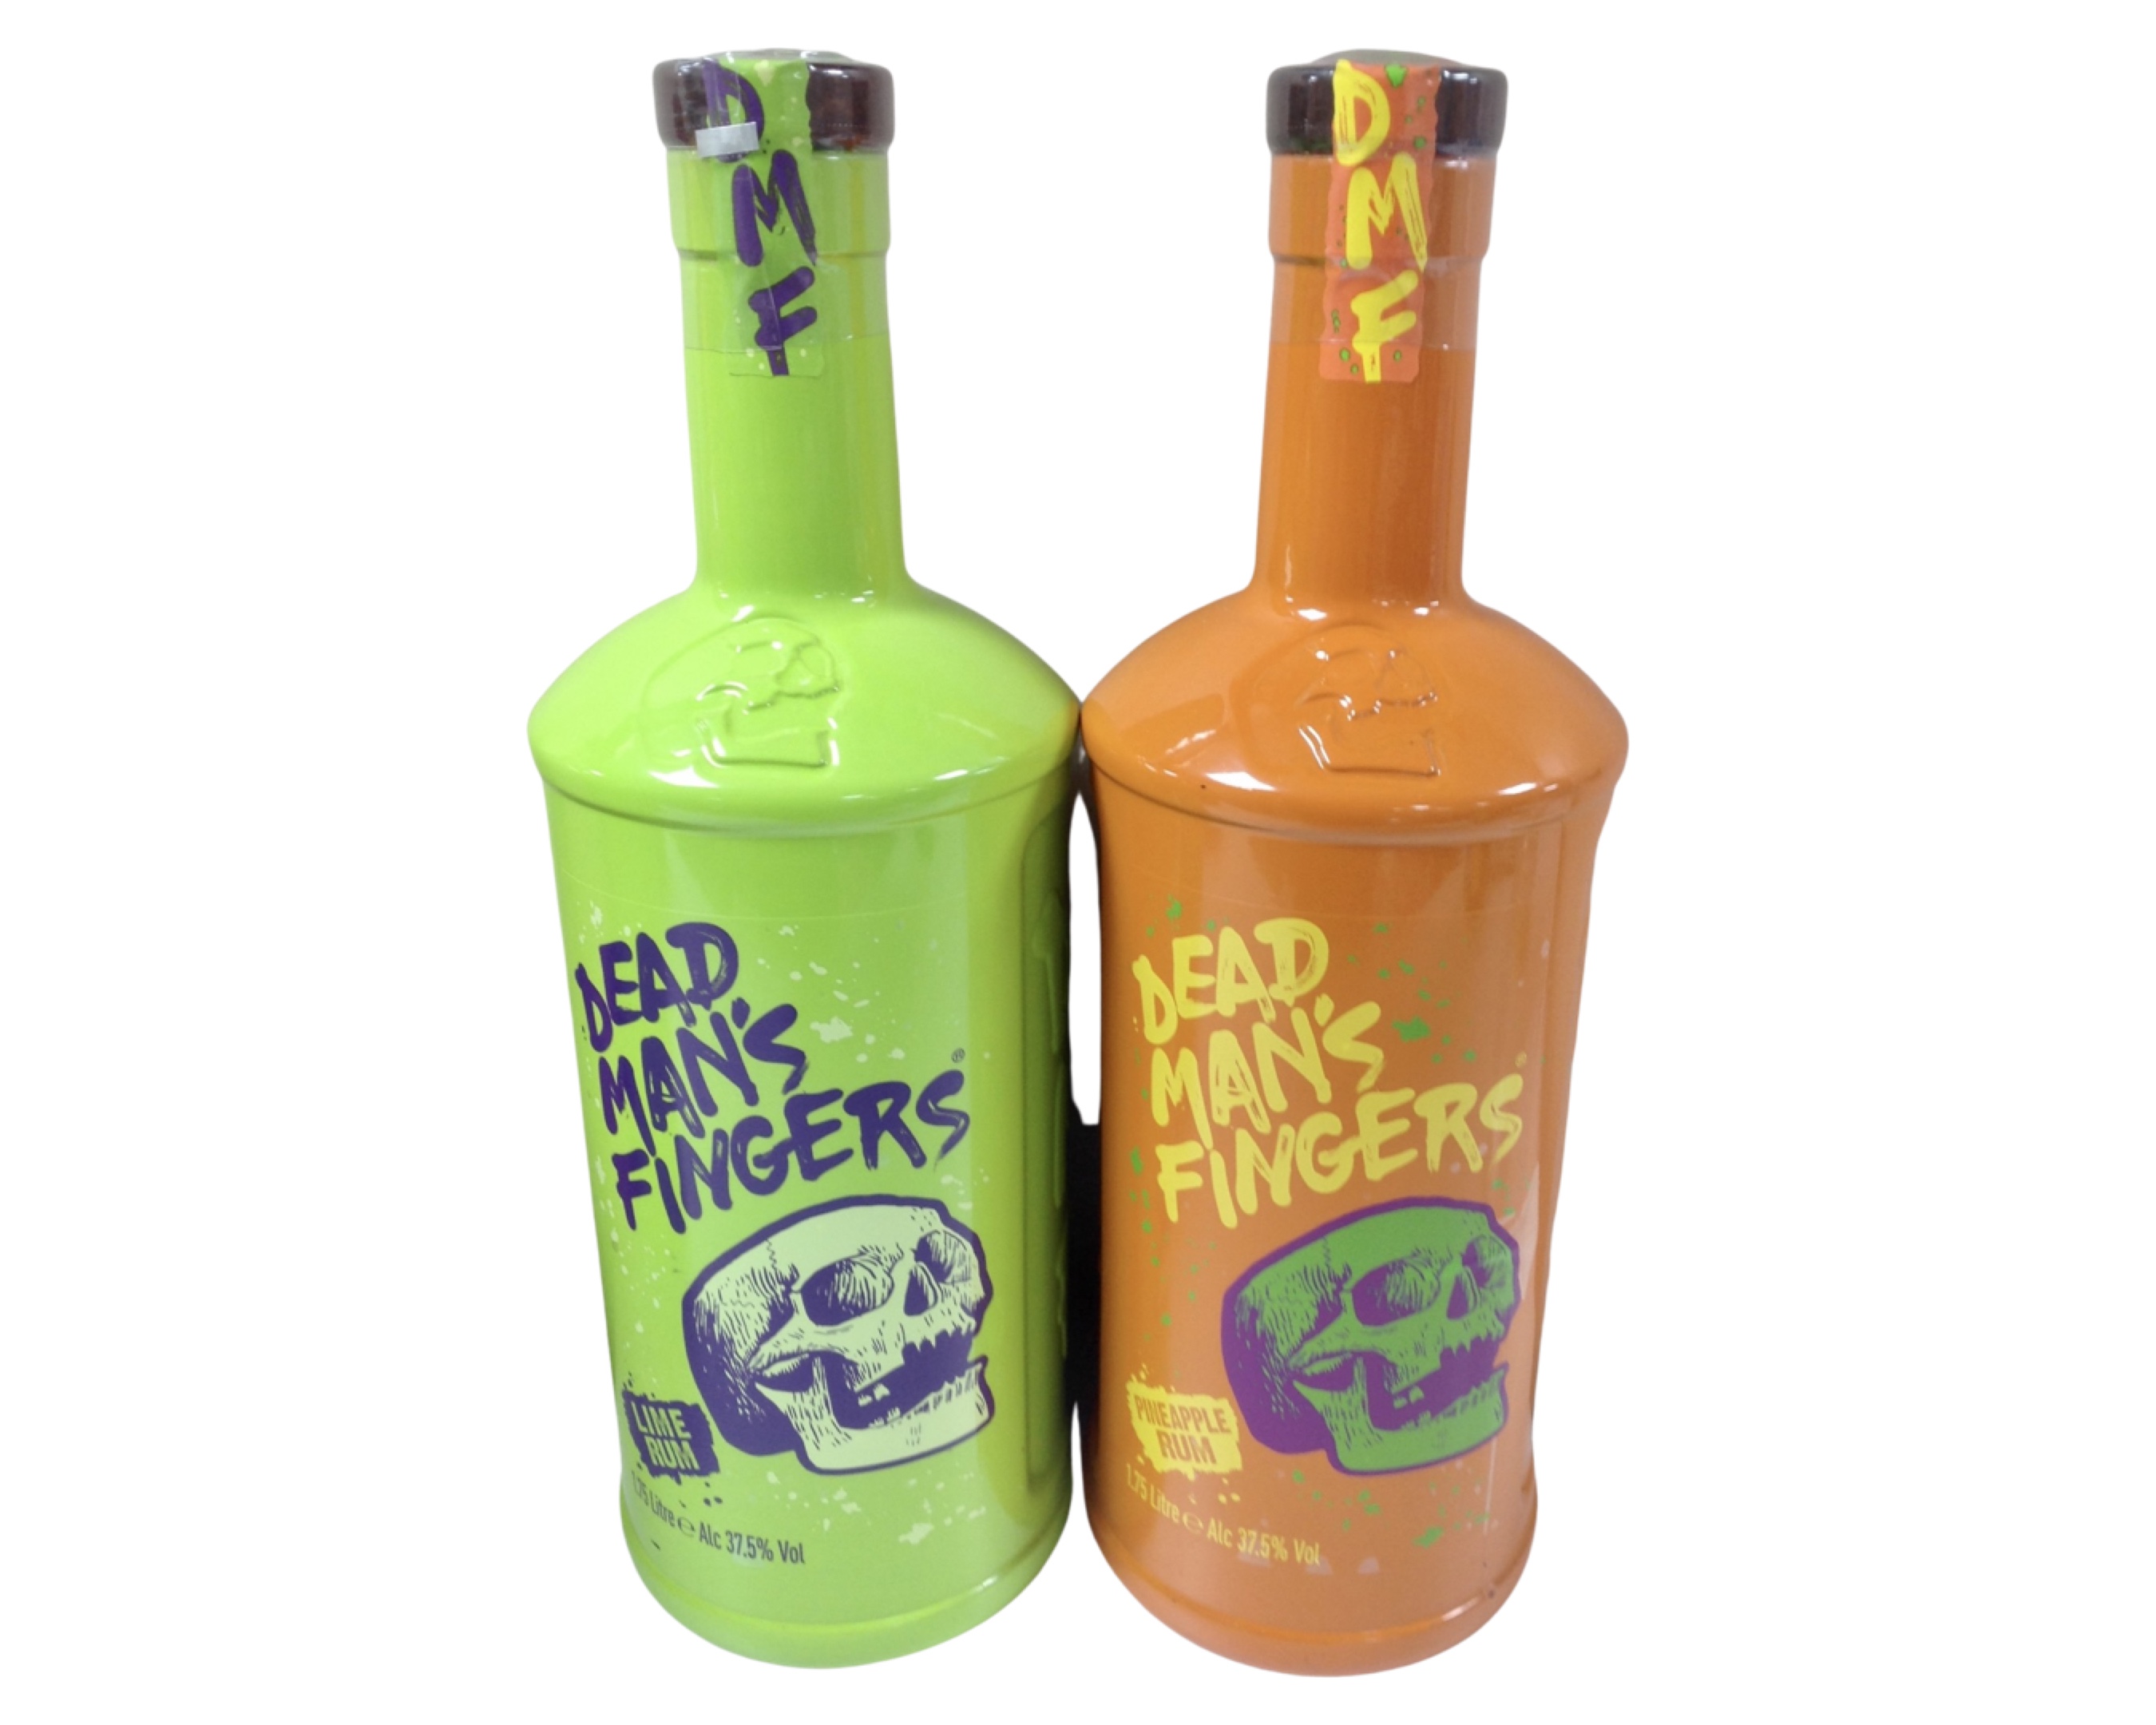 Two bottles of Dead Man's Fingers rum, Lime and Pineapple, 1.75l.